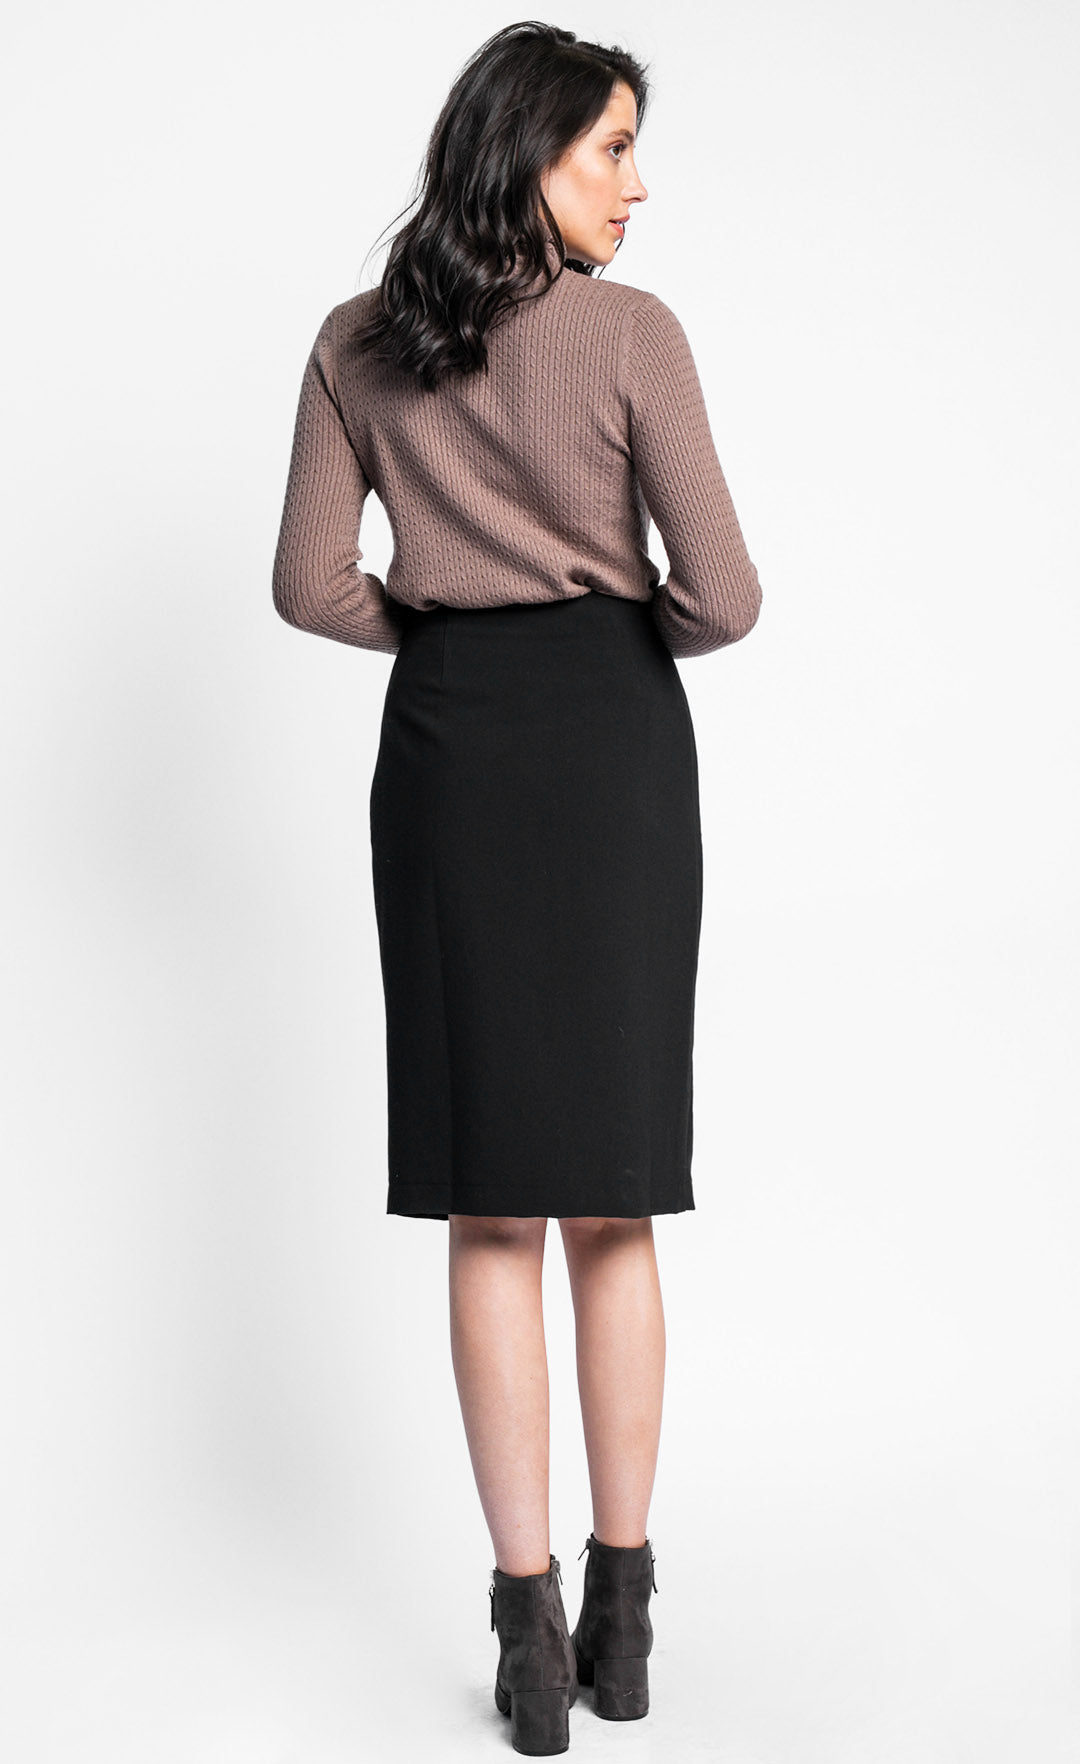 The Scarlett Skirt - Pink Martini Collection